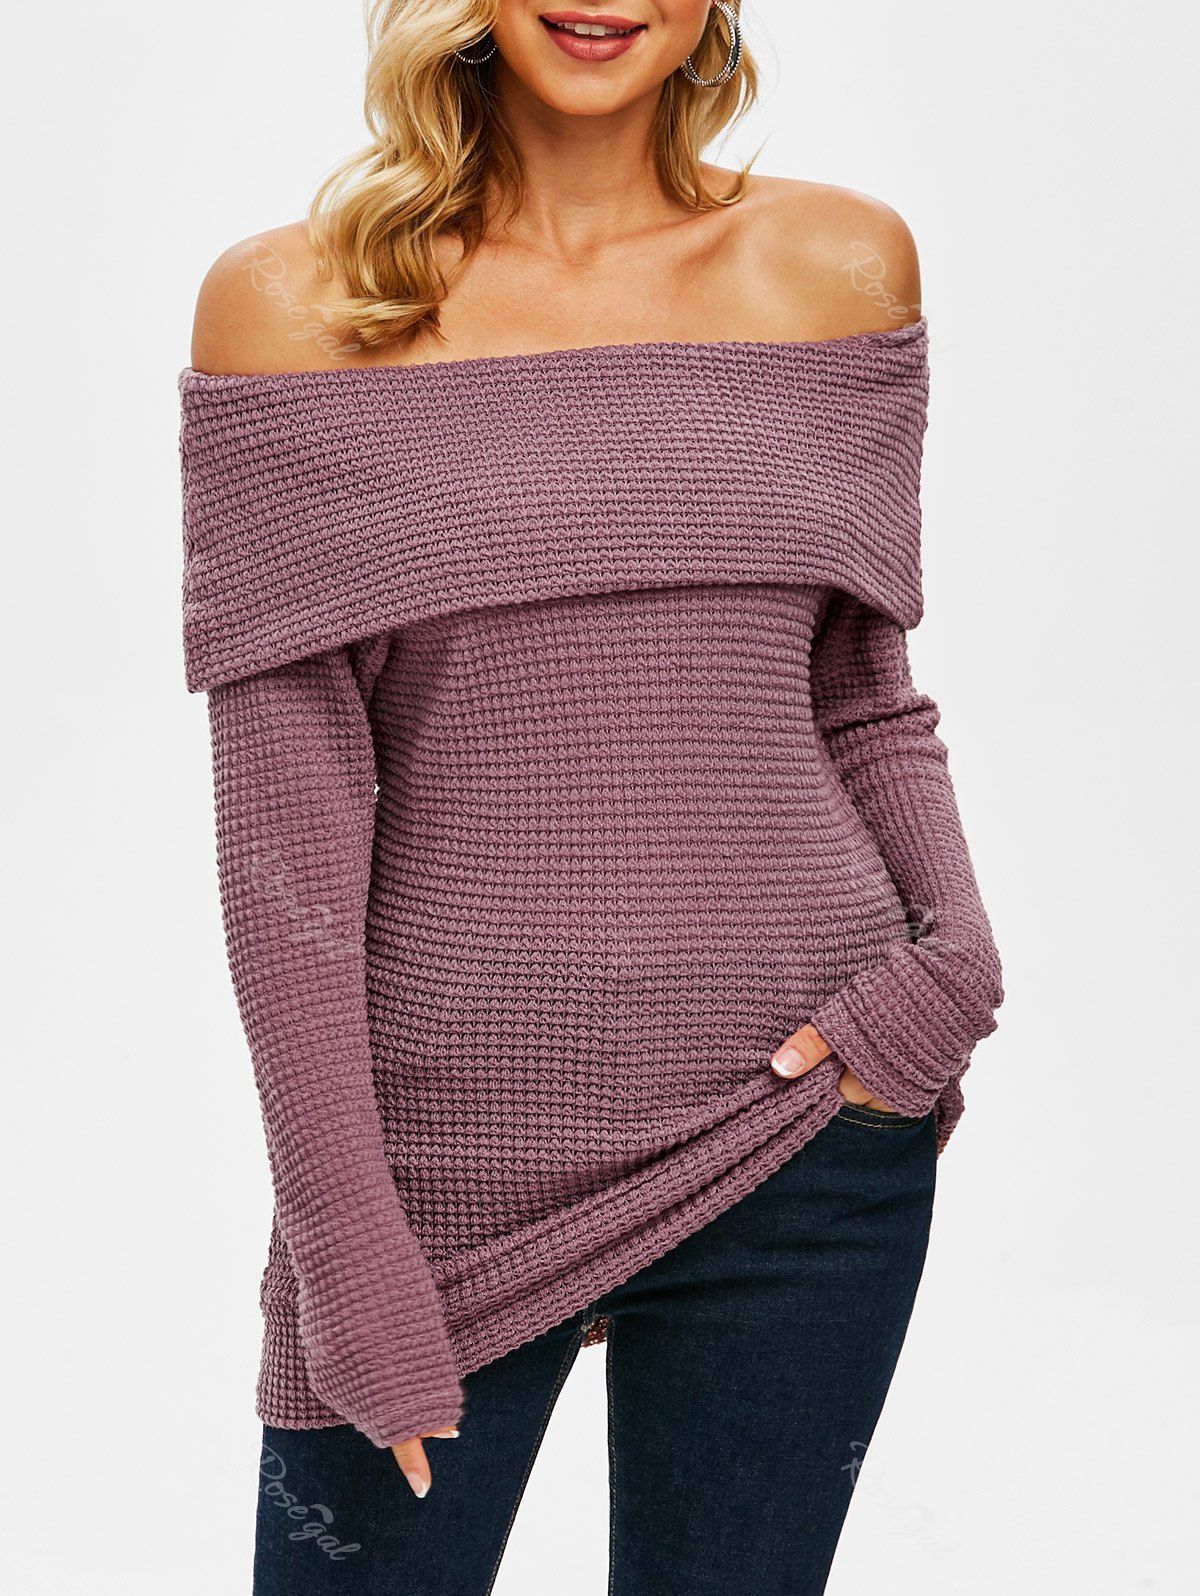 Cheap Off Shoulder Foldover Knitted Sweater  